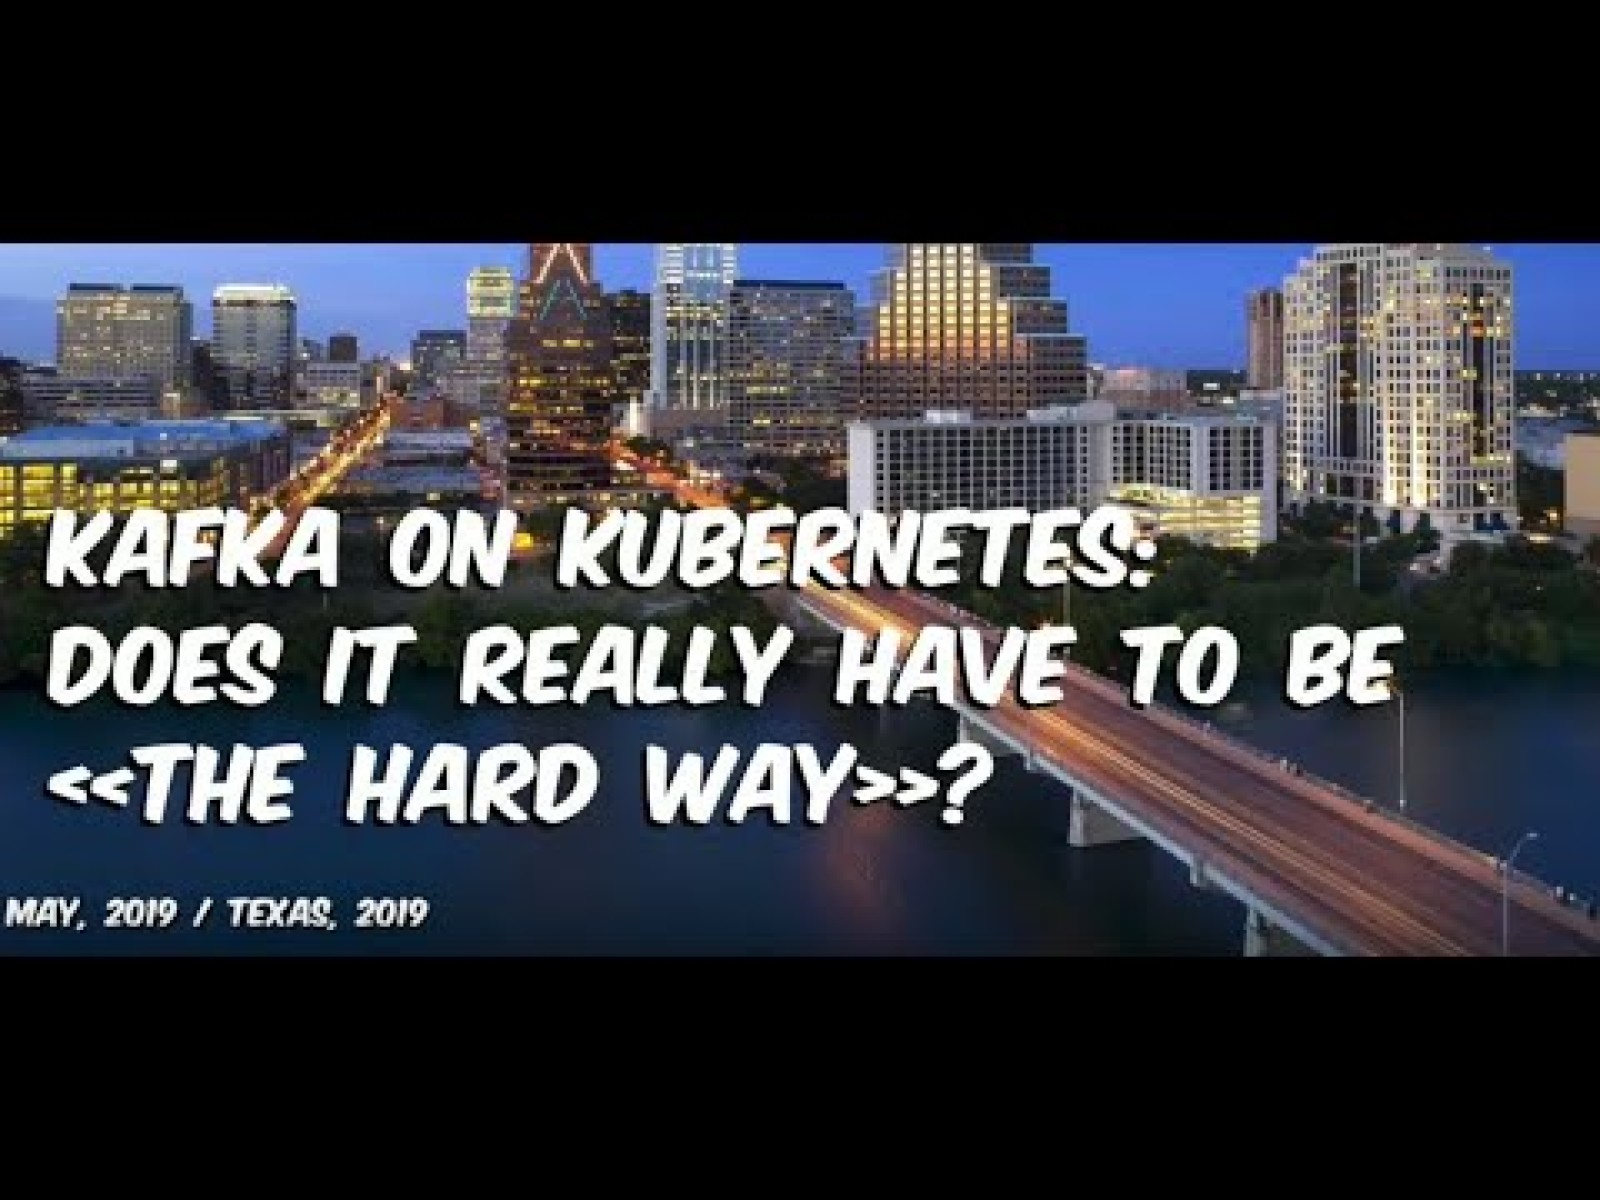 Kafka on Kubernetes: Does It Really Have To Be “The Hard Way”?